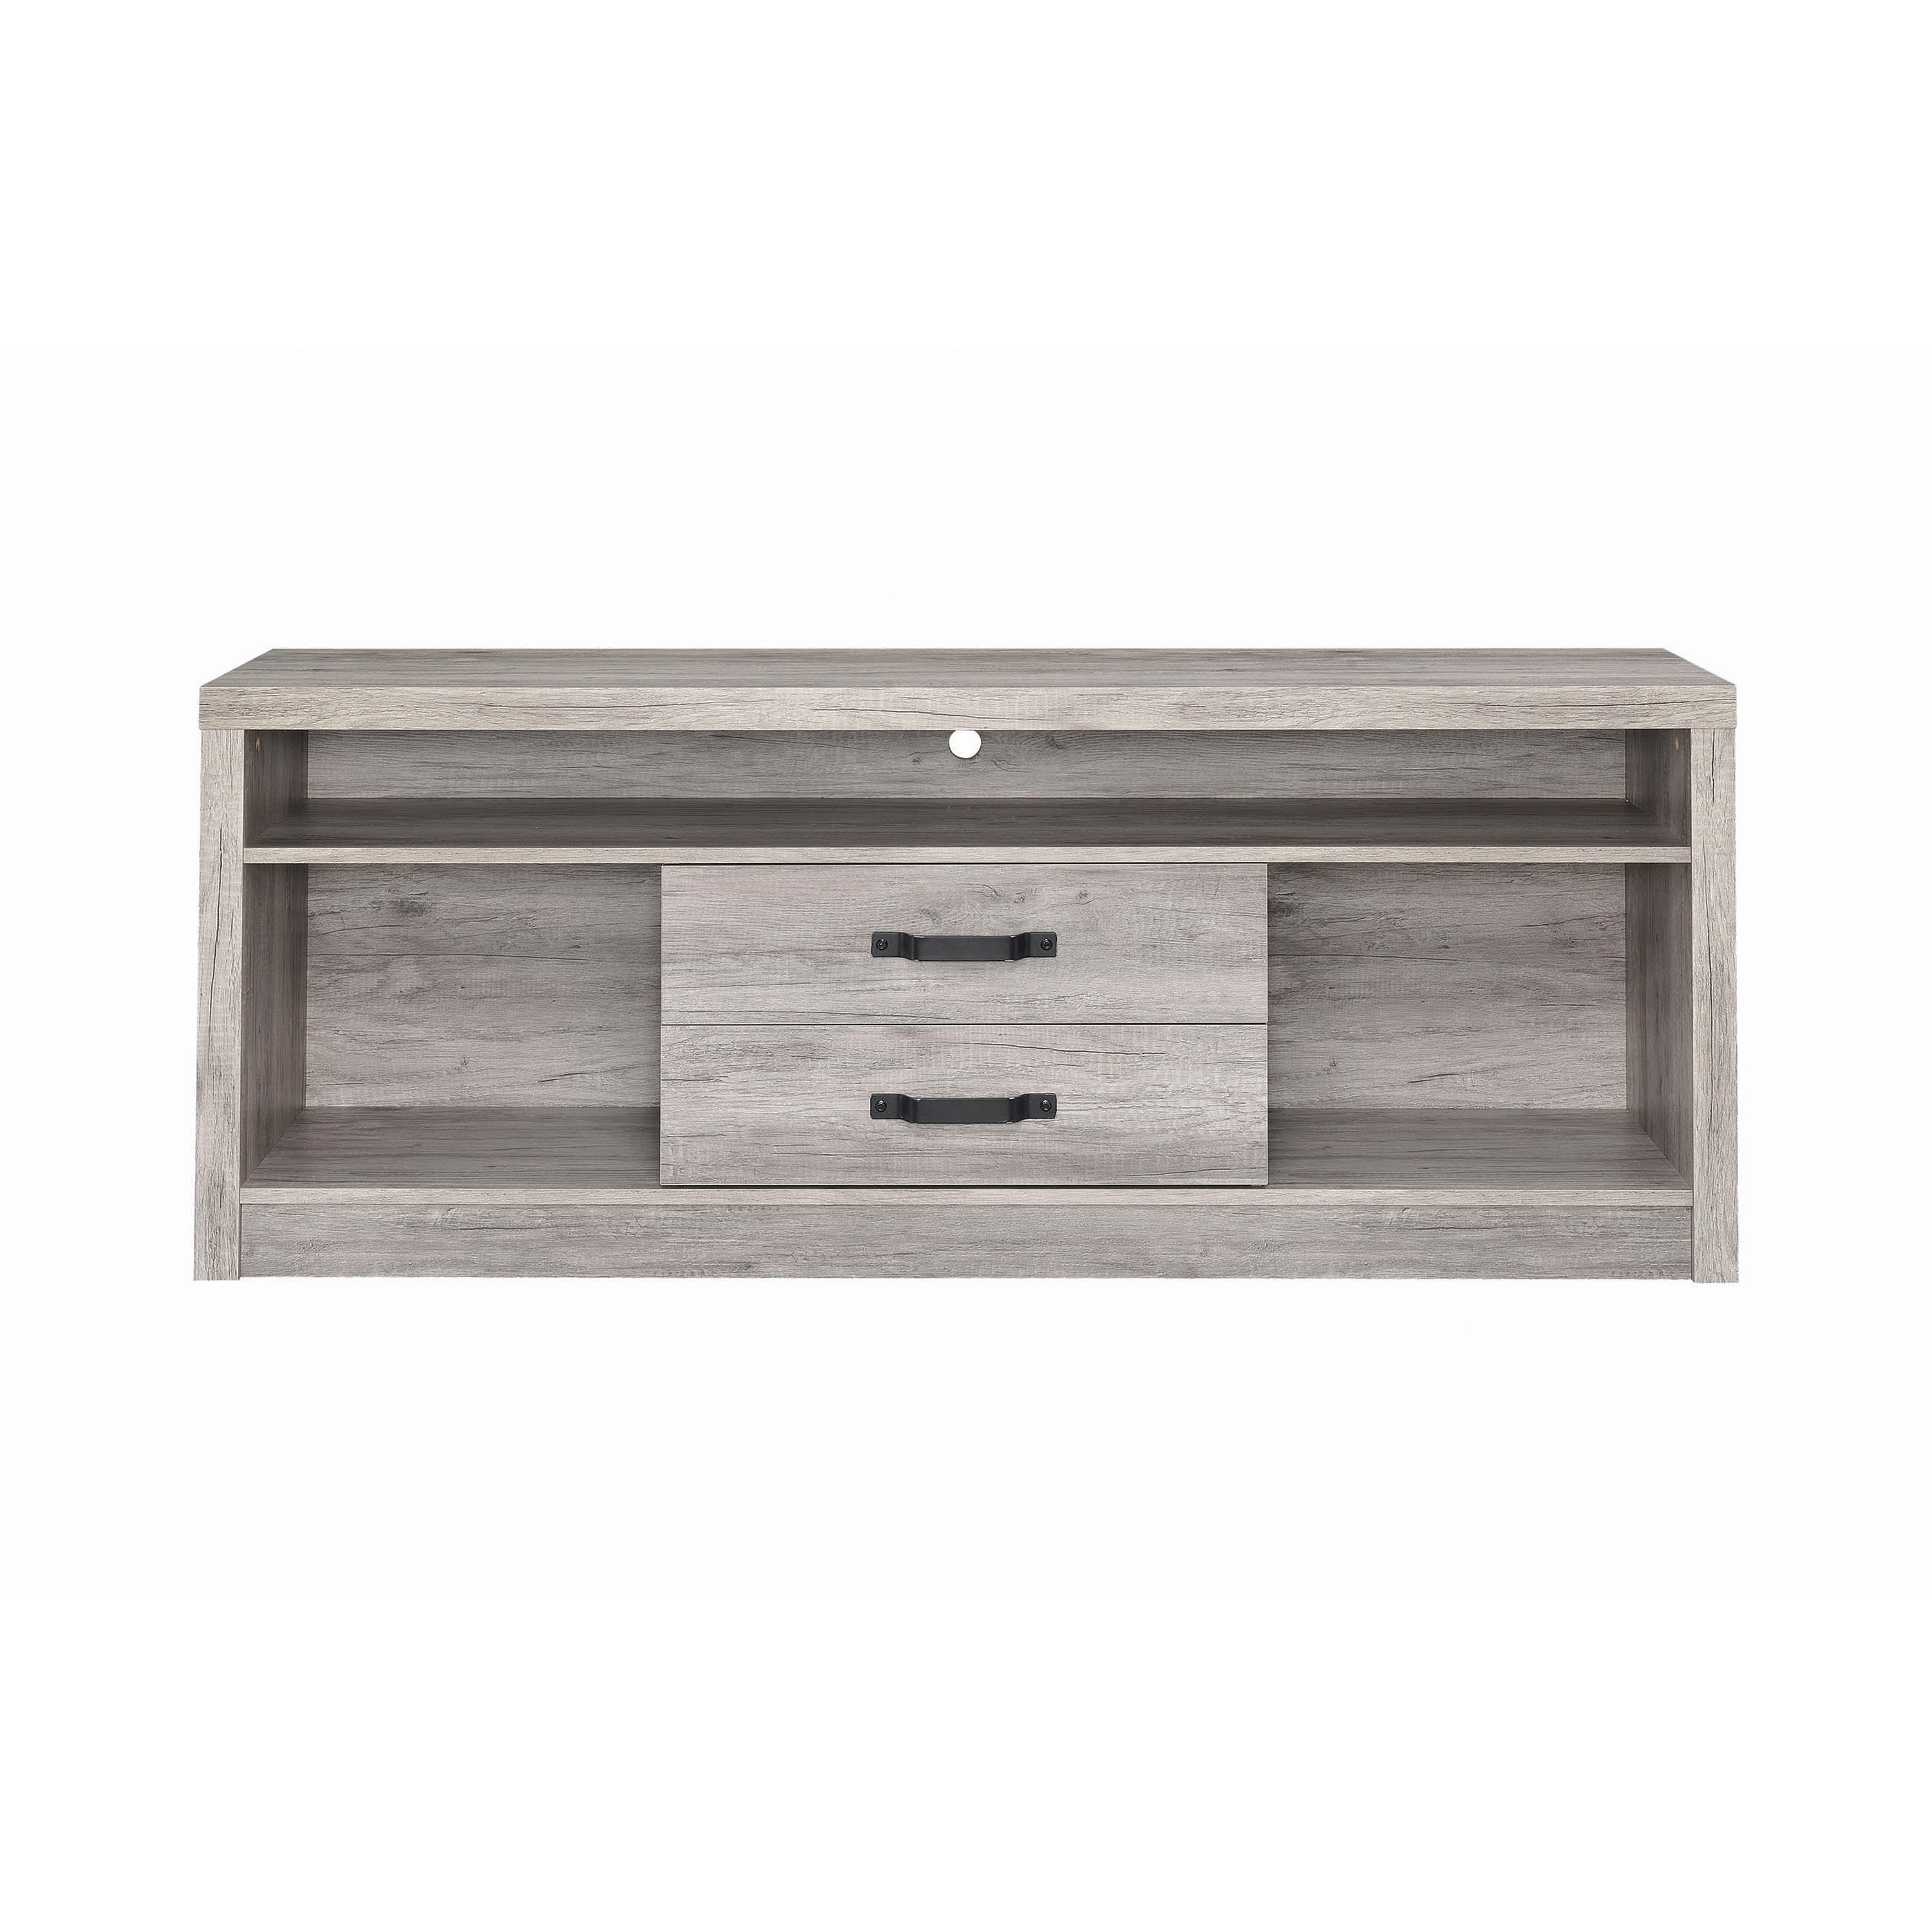 Contemporary Tv Console 701024 701024 in Driftwood 